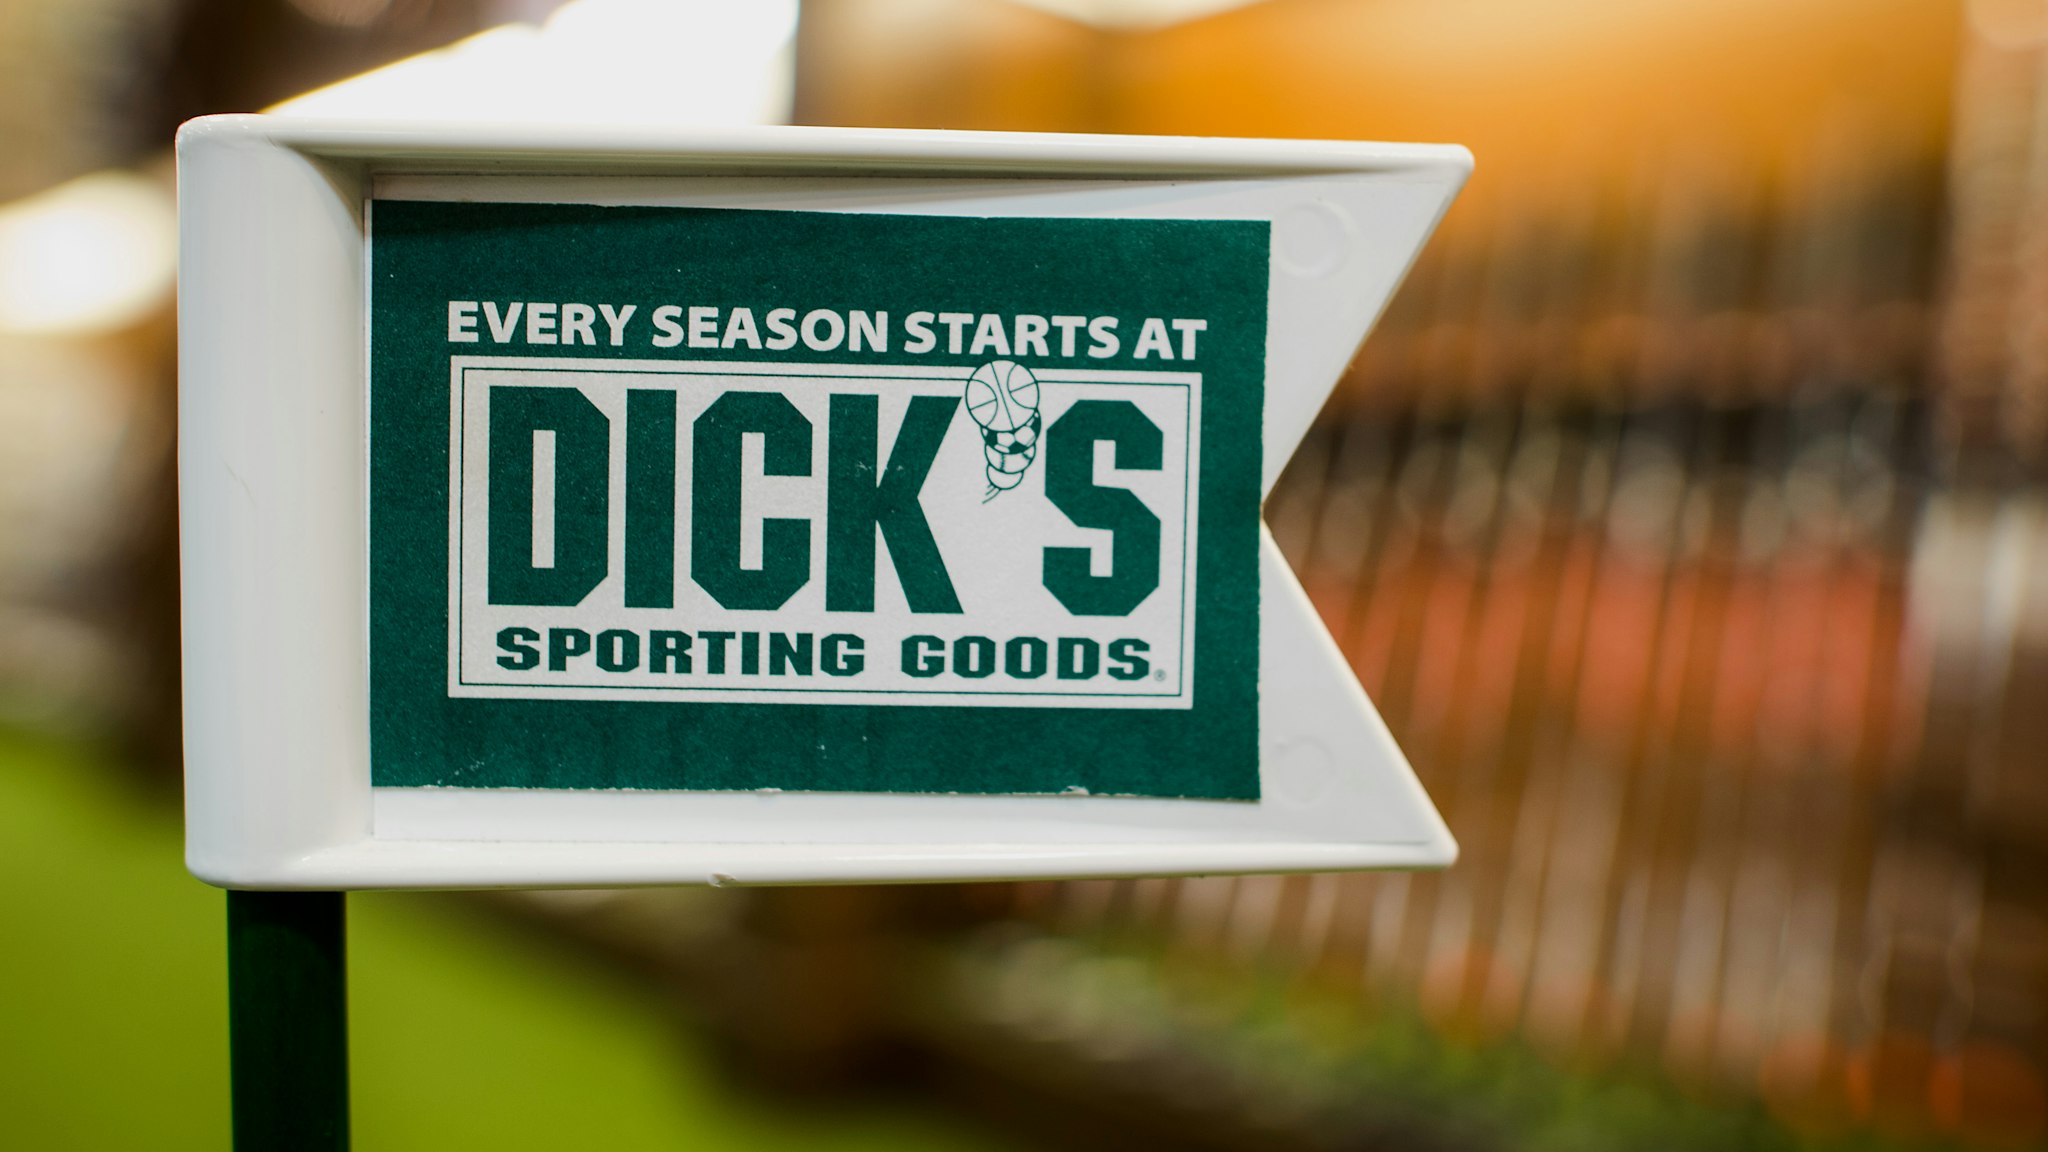 A golf flag stands on a practice green at a Dick's Sporting Goods Inc. store in West Nyack, New York, U.S., on Wednesday, May 21, 2014. Dick's Sporting Goods Inc. shares fell the most in more than a decade after weak sales of golfing and hunting gear crimped its profit forecast. Photographer: Craig Warga/Bloomberg via Getty Images